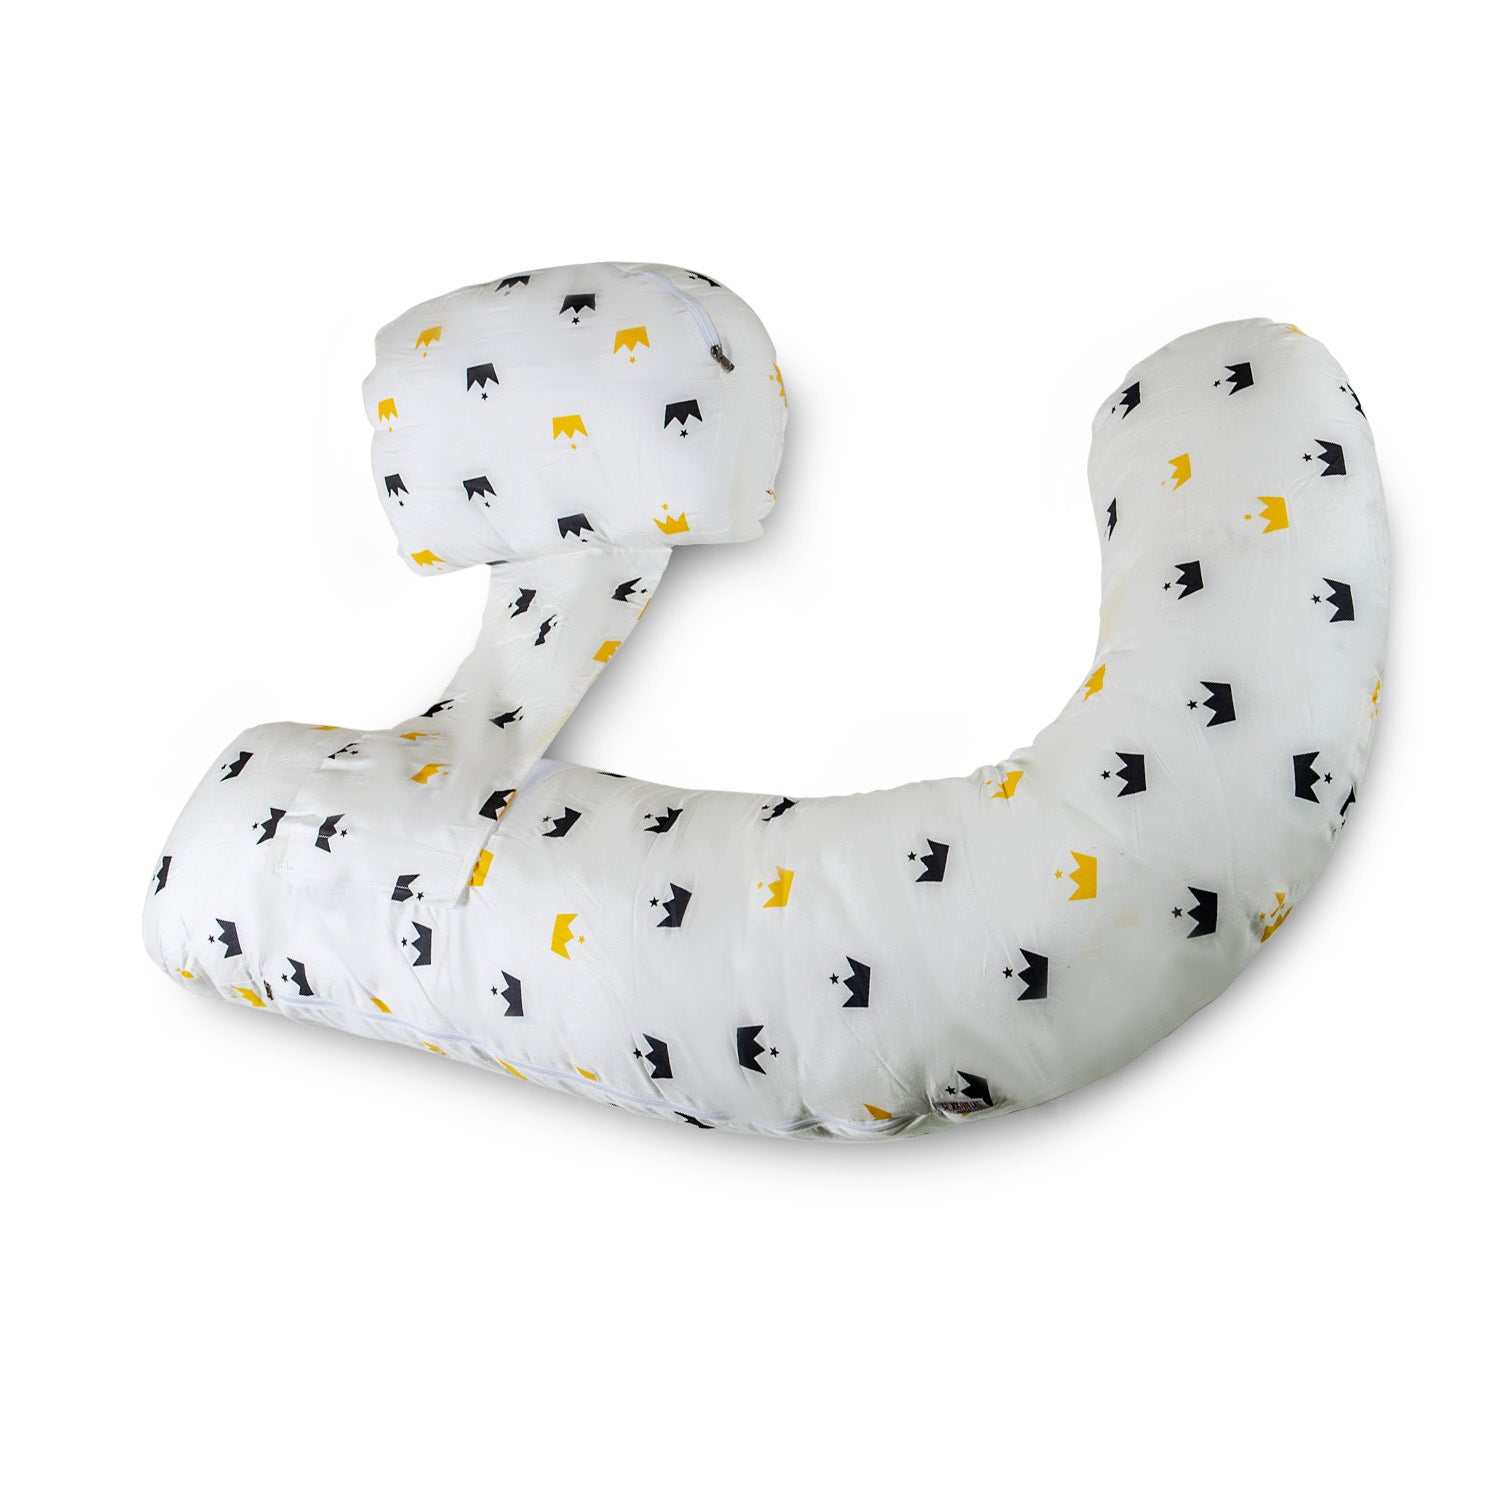 H-Shaped Pregnancy Pillow for Pregnant Women - White - Baby Moo